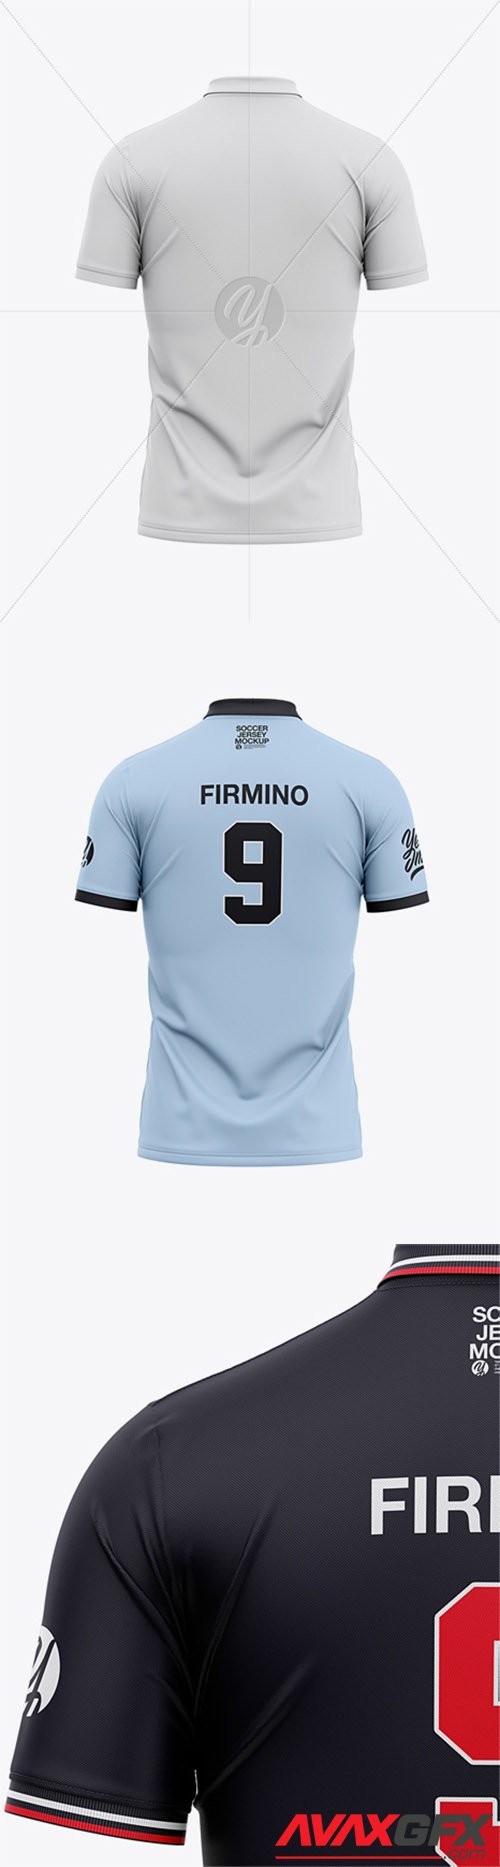 Download Men's Soccer Jersey Mockup - Back View Of Polo Shirt 43790 ...